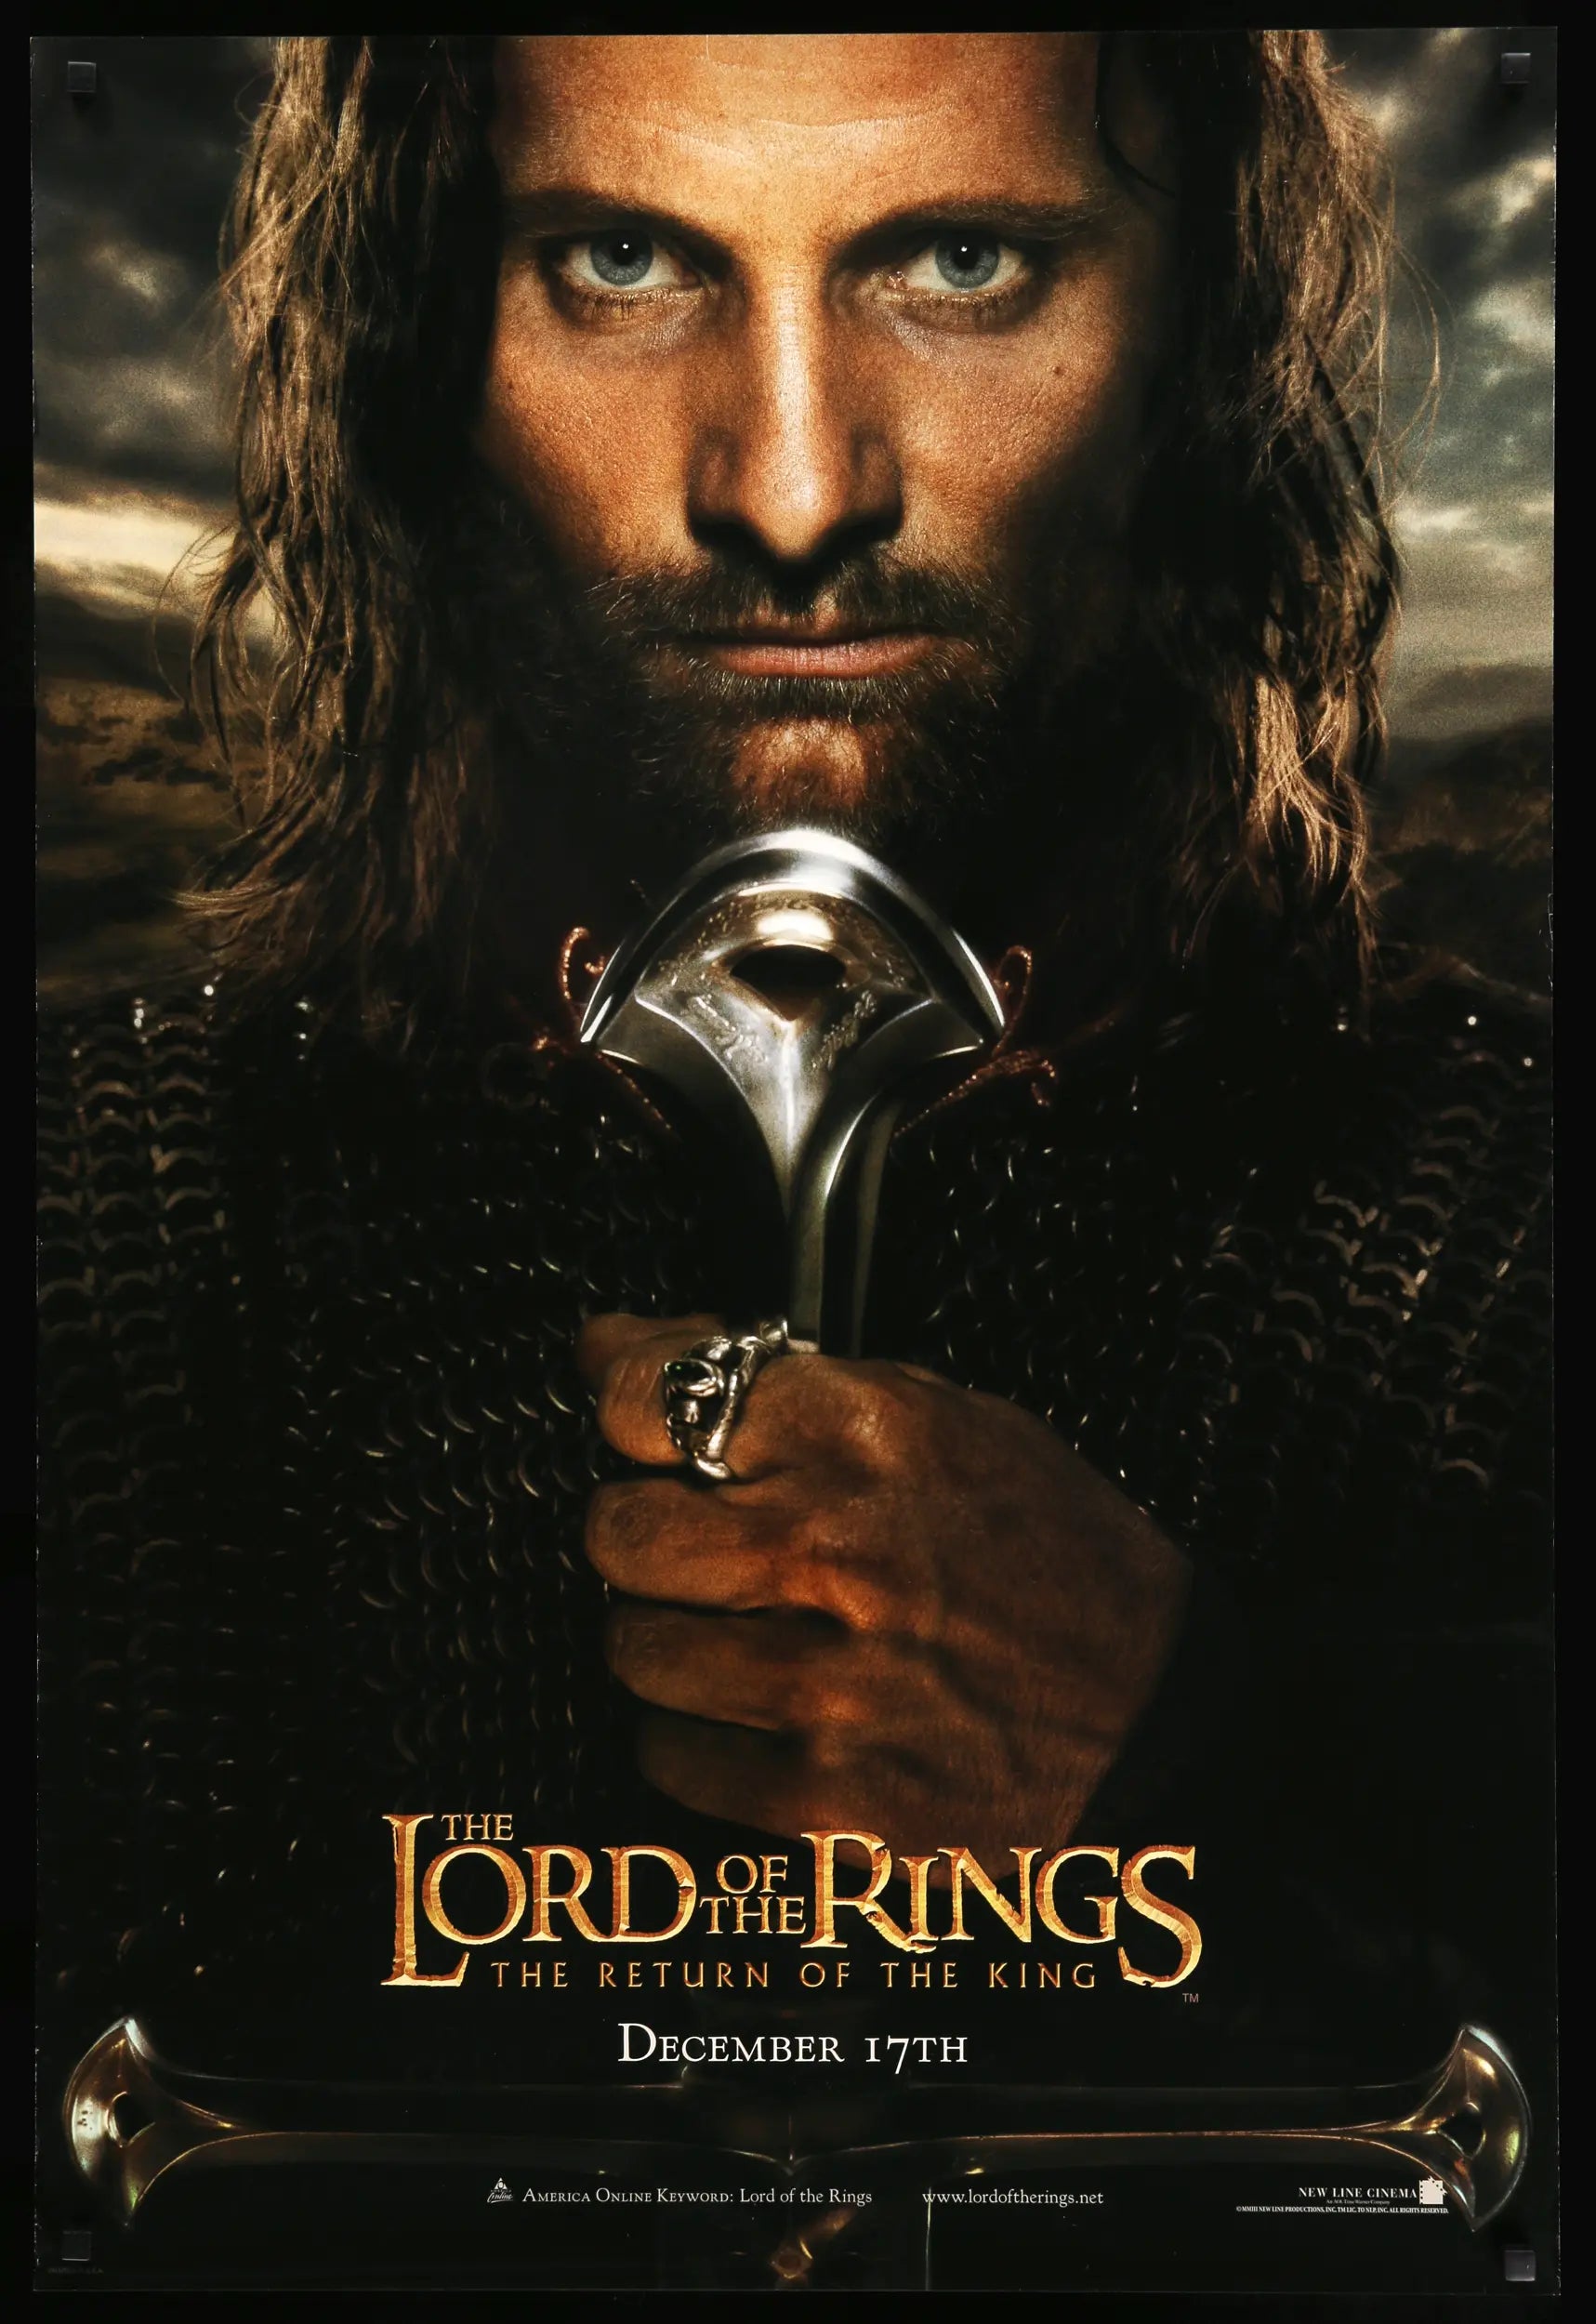  LORD OF THE RINGS FELLOWSHIP OF THE RING MOVIE POSTER 1 Sided  ORIGINAL FINAL 27x40: Prints: Posters & Prints